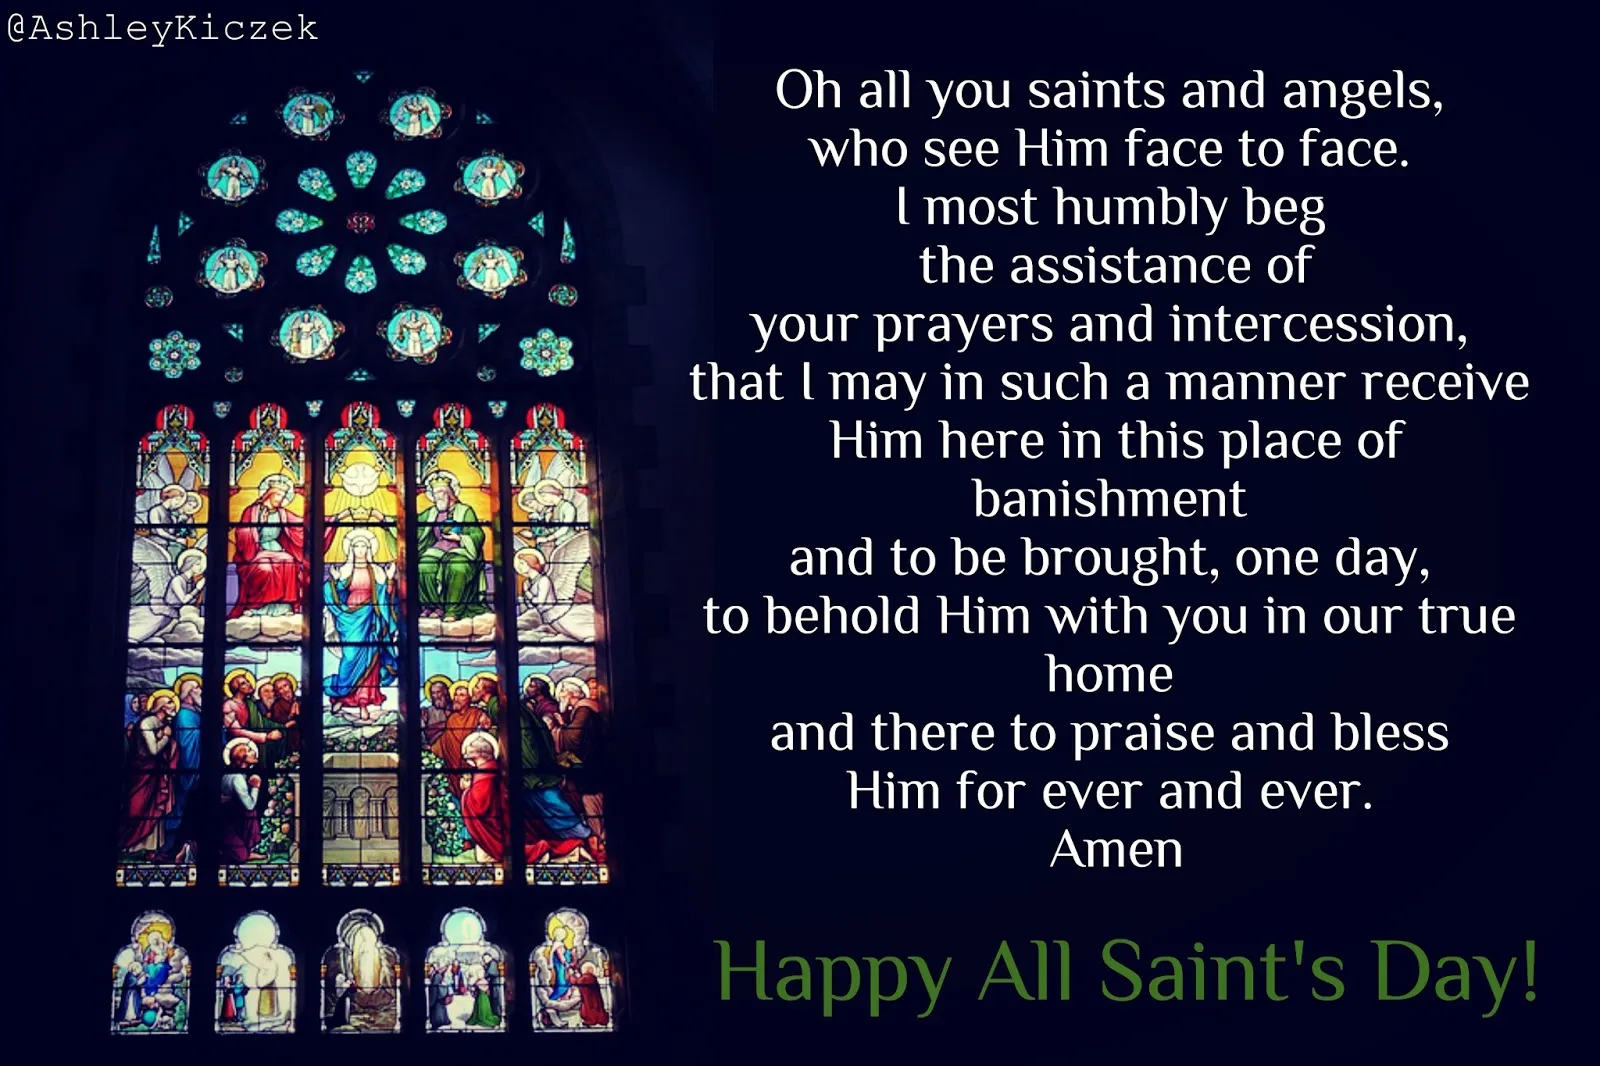 prayers for all saints day